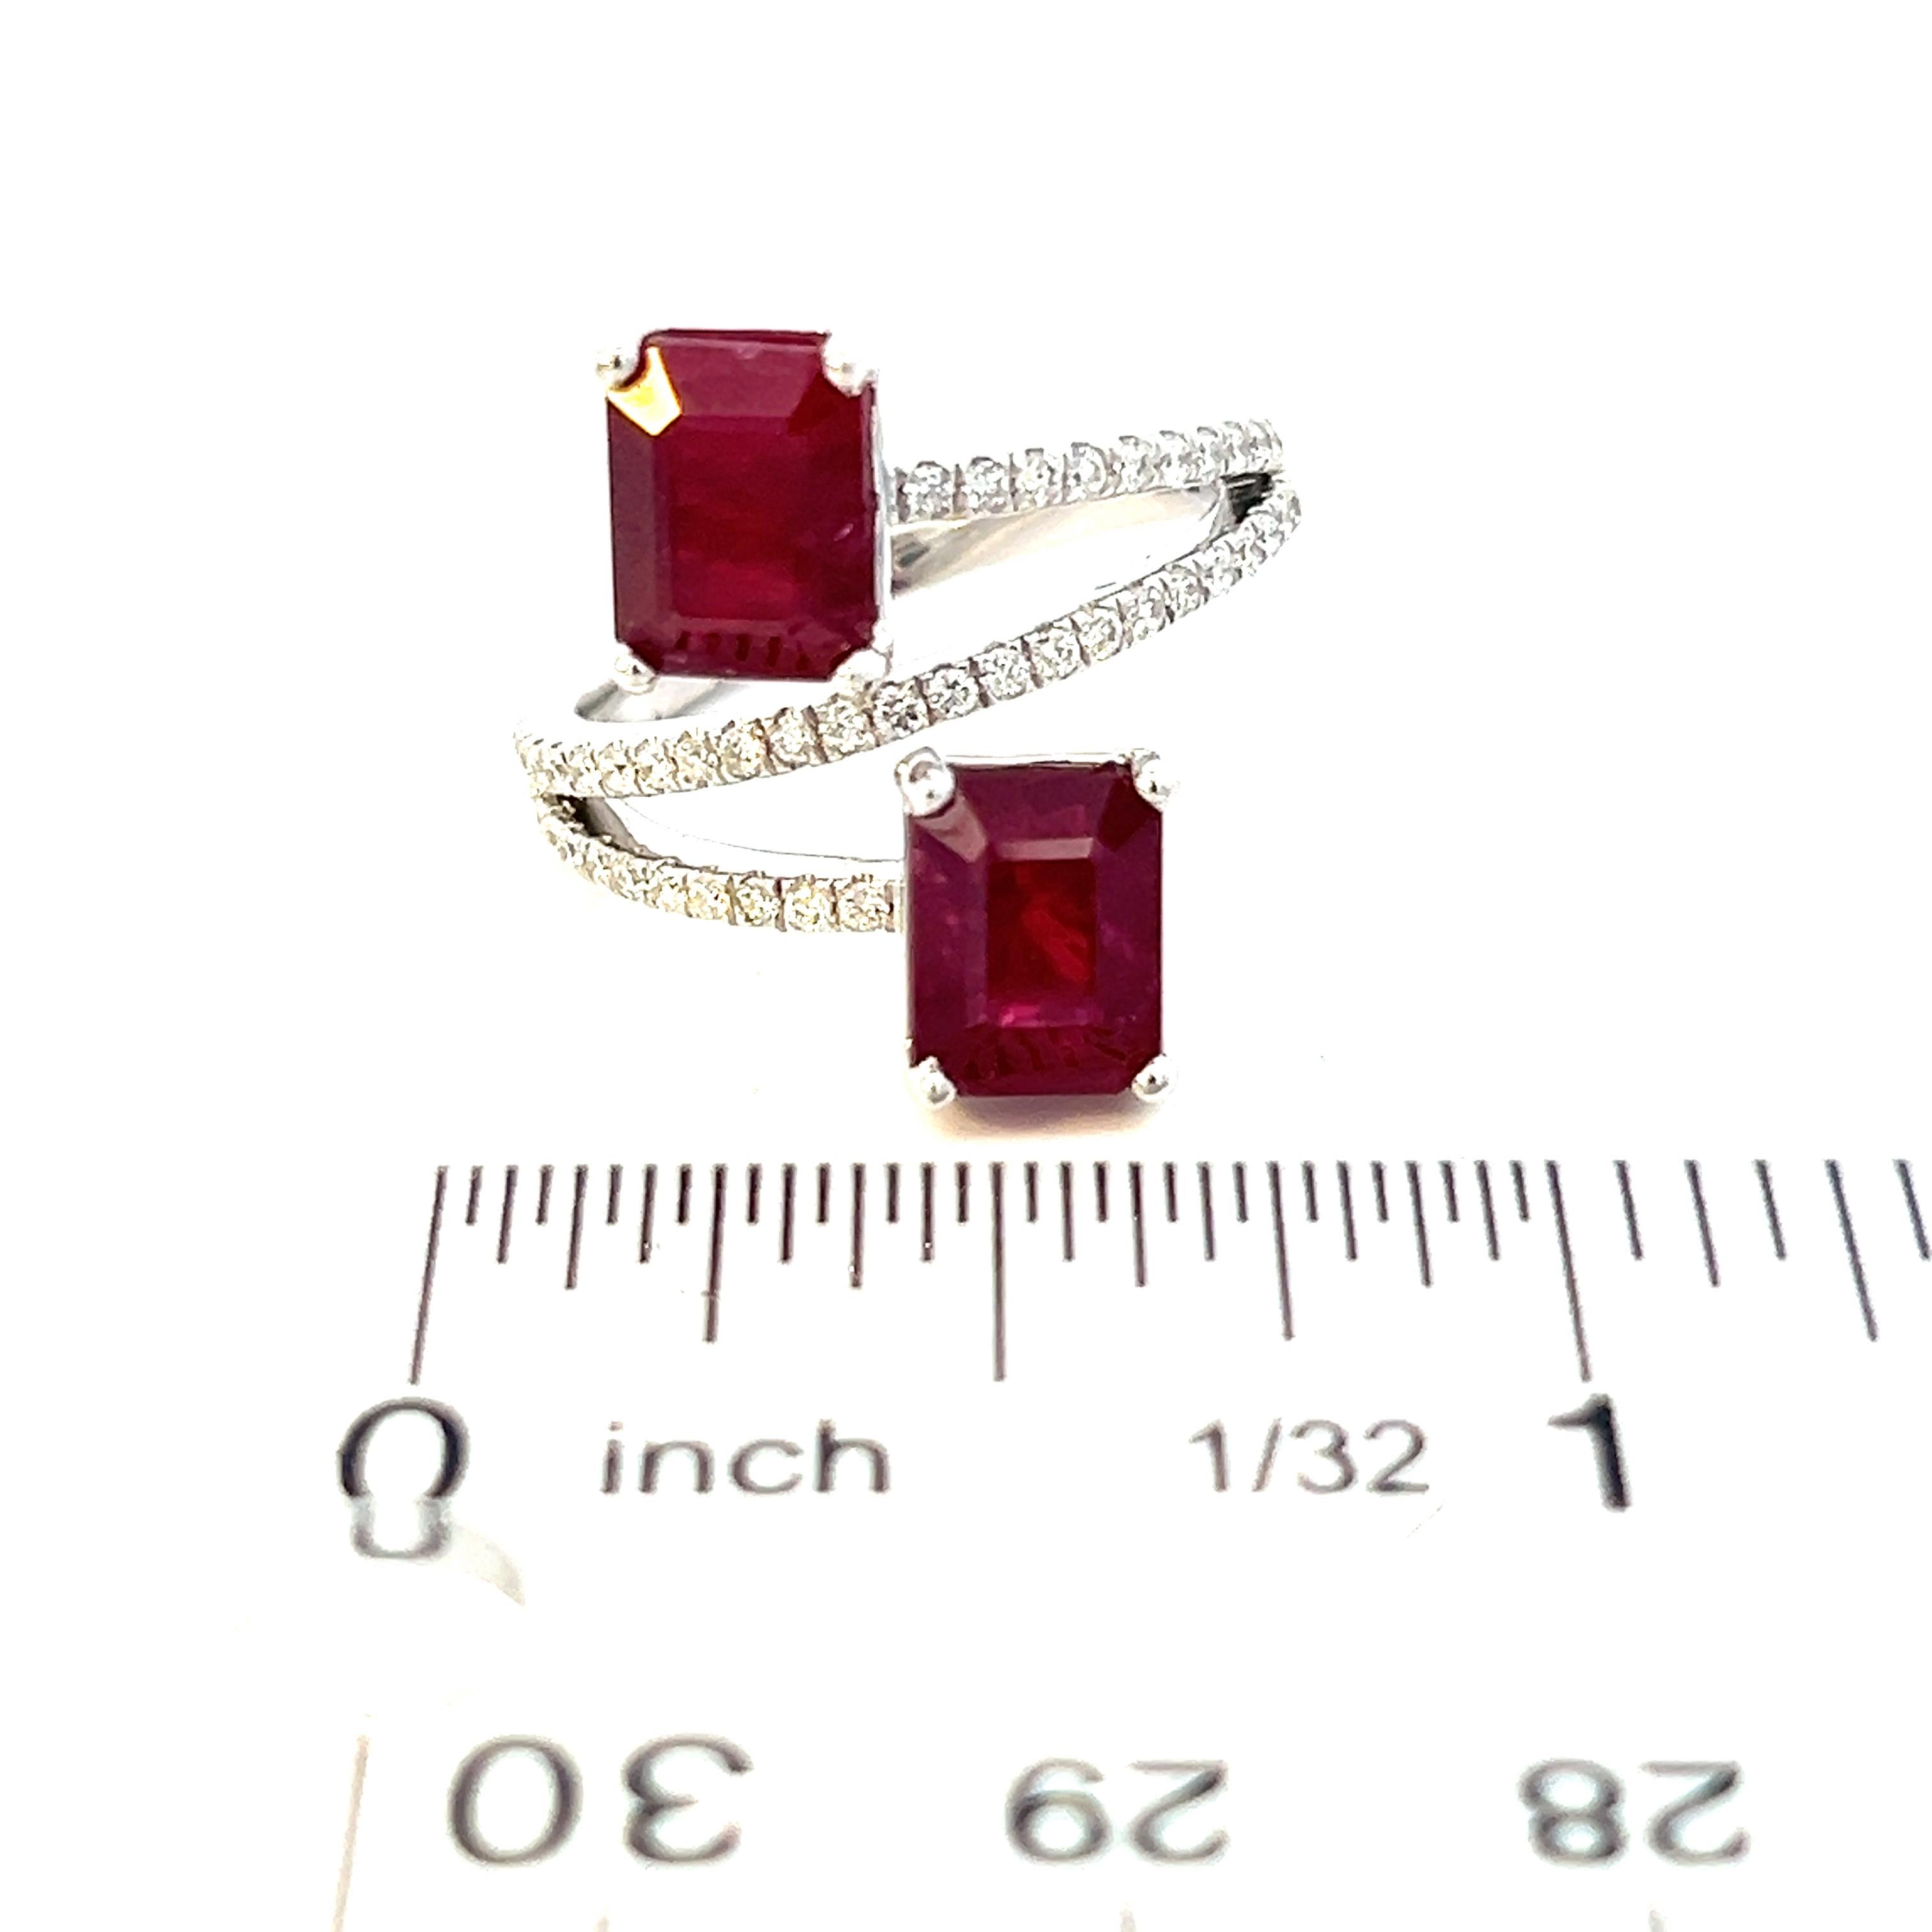 Natural Dual Ruby Diamond Ring 6.5 14k W Gold 5.02 TCW Certified For Sale 6